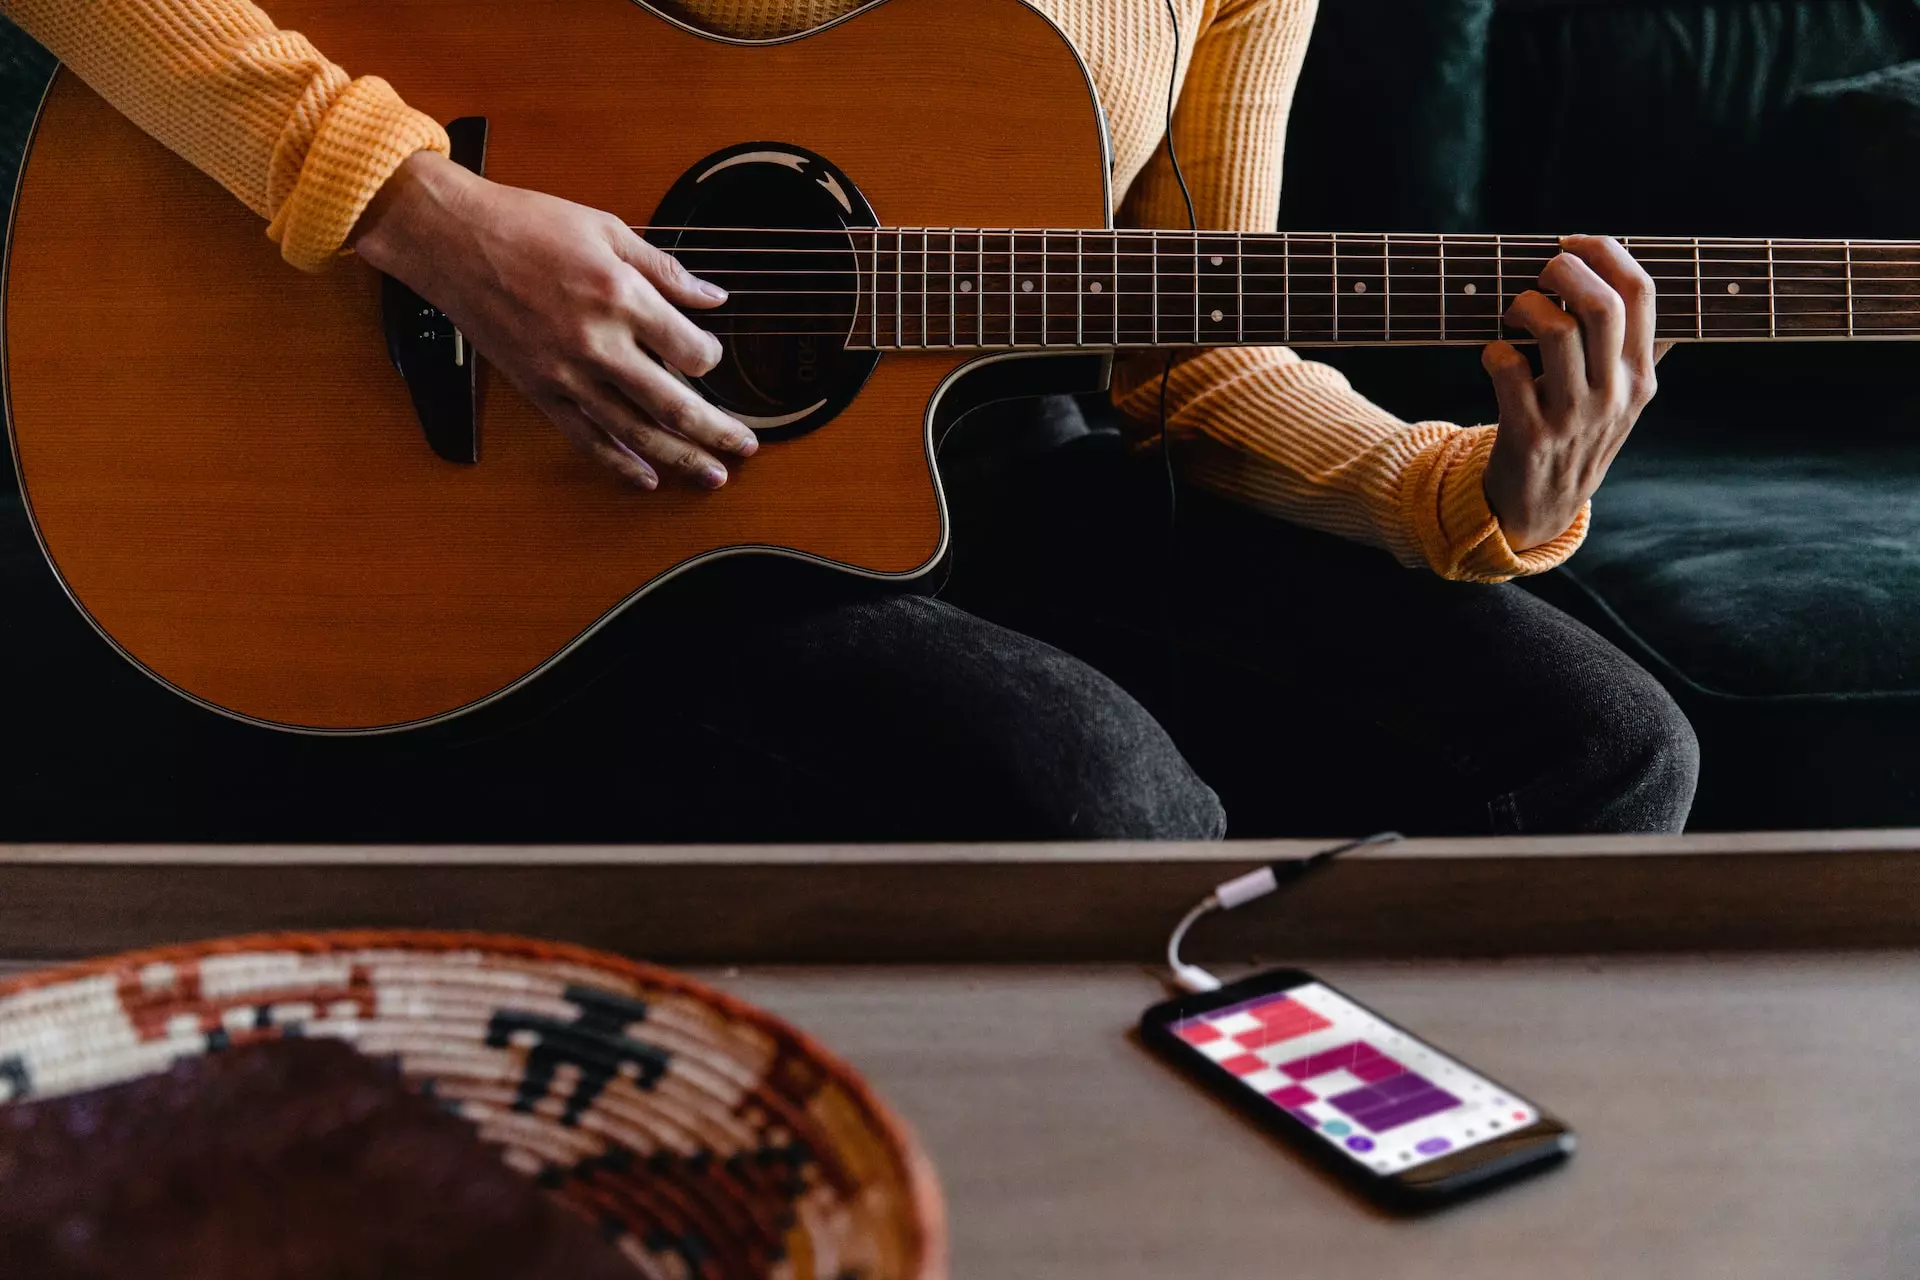 A phone connected to a guitar that a person is playing.